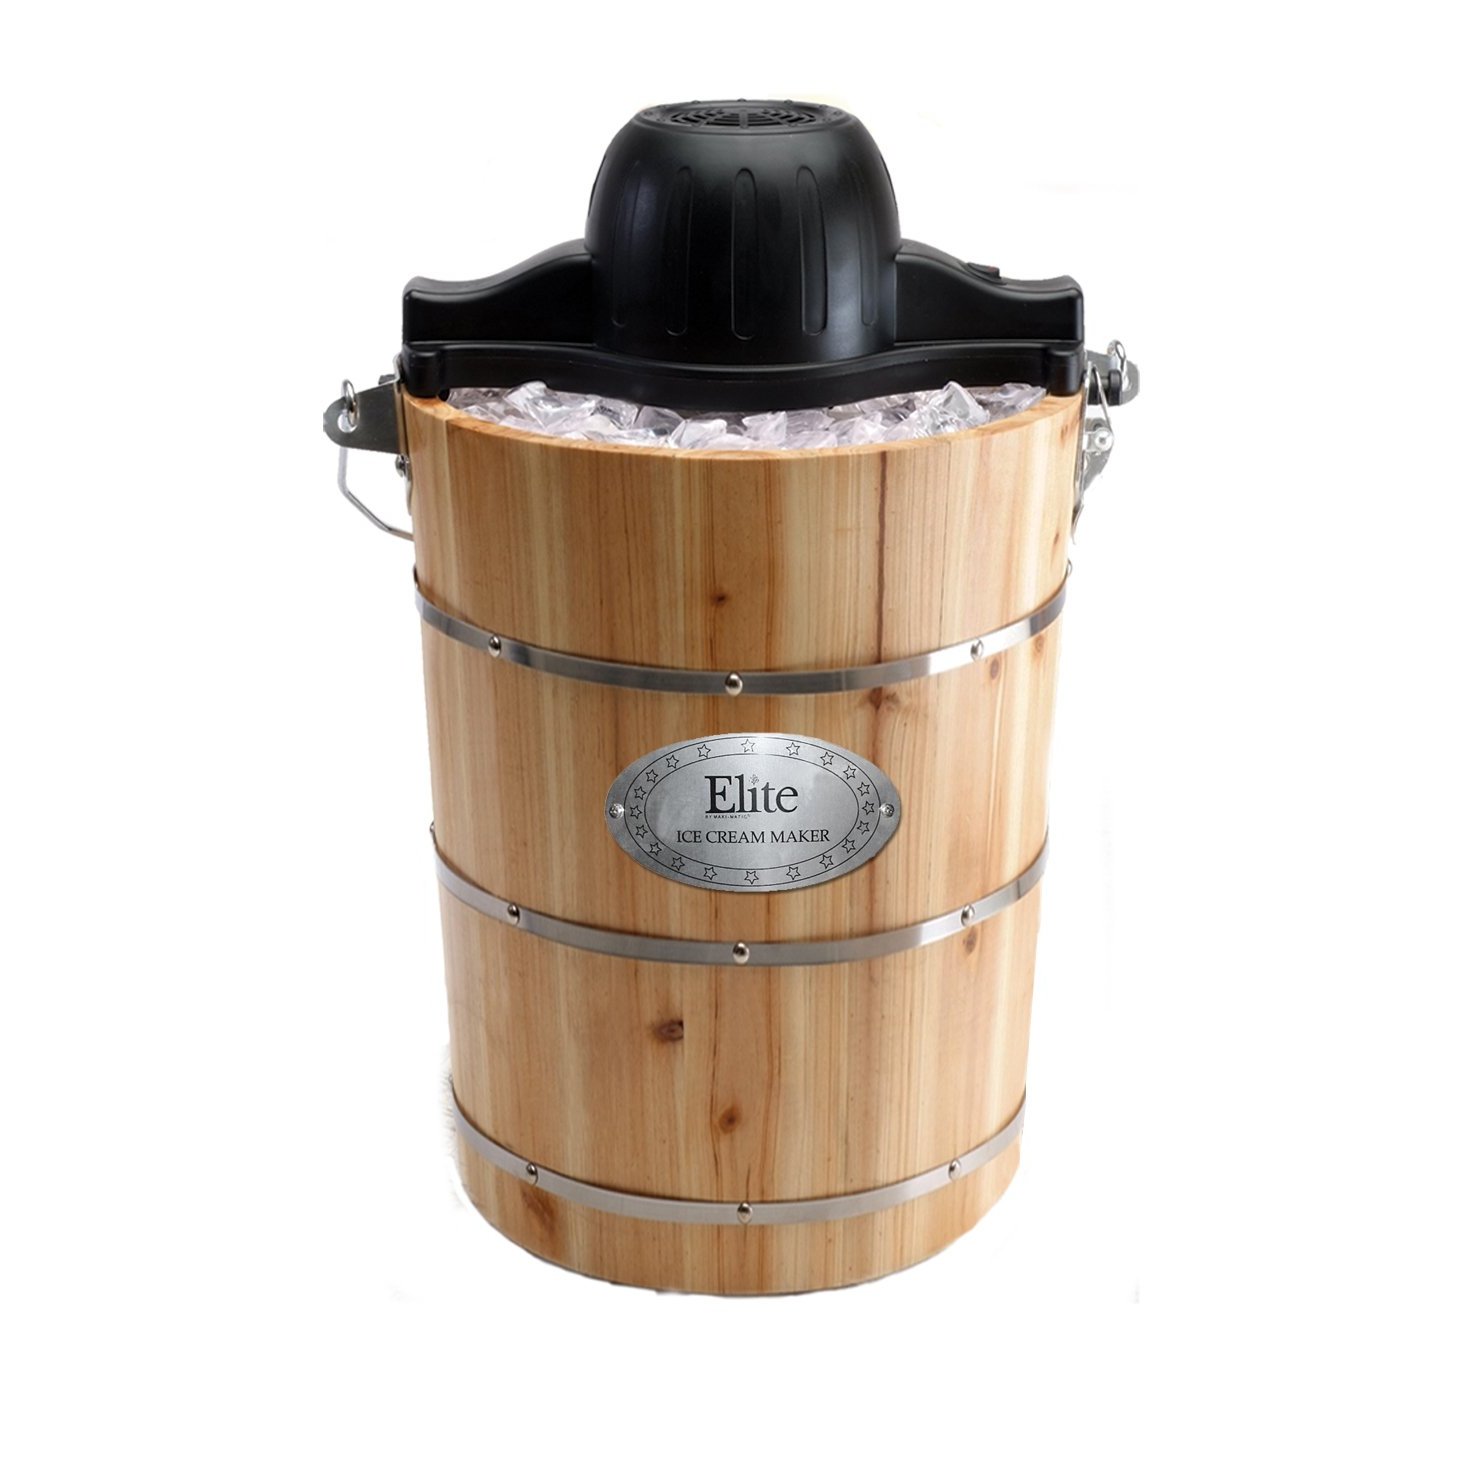 Maxi-Matic Elite Gourmet Old Fashioned Pine Bucket Electric/Manual Ice Cream Maker $31.44